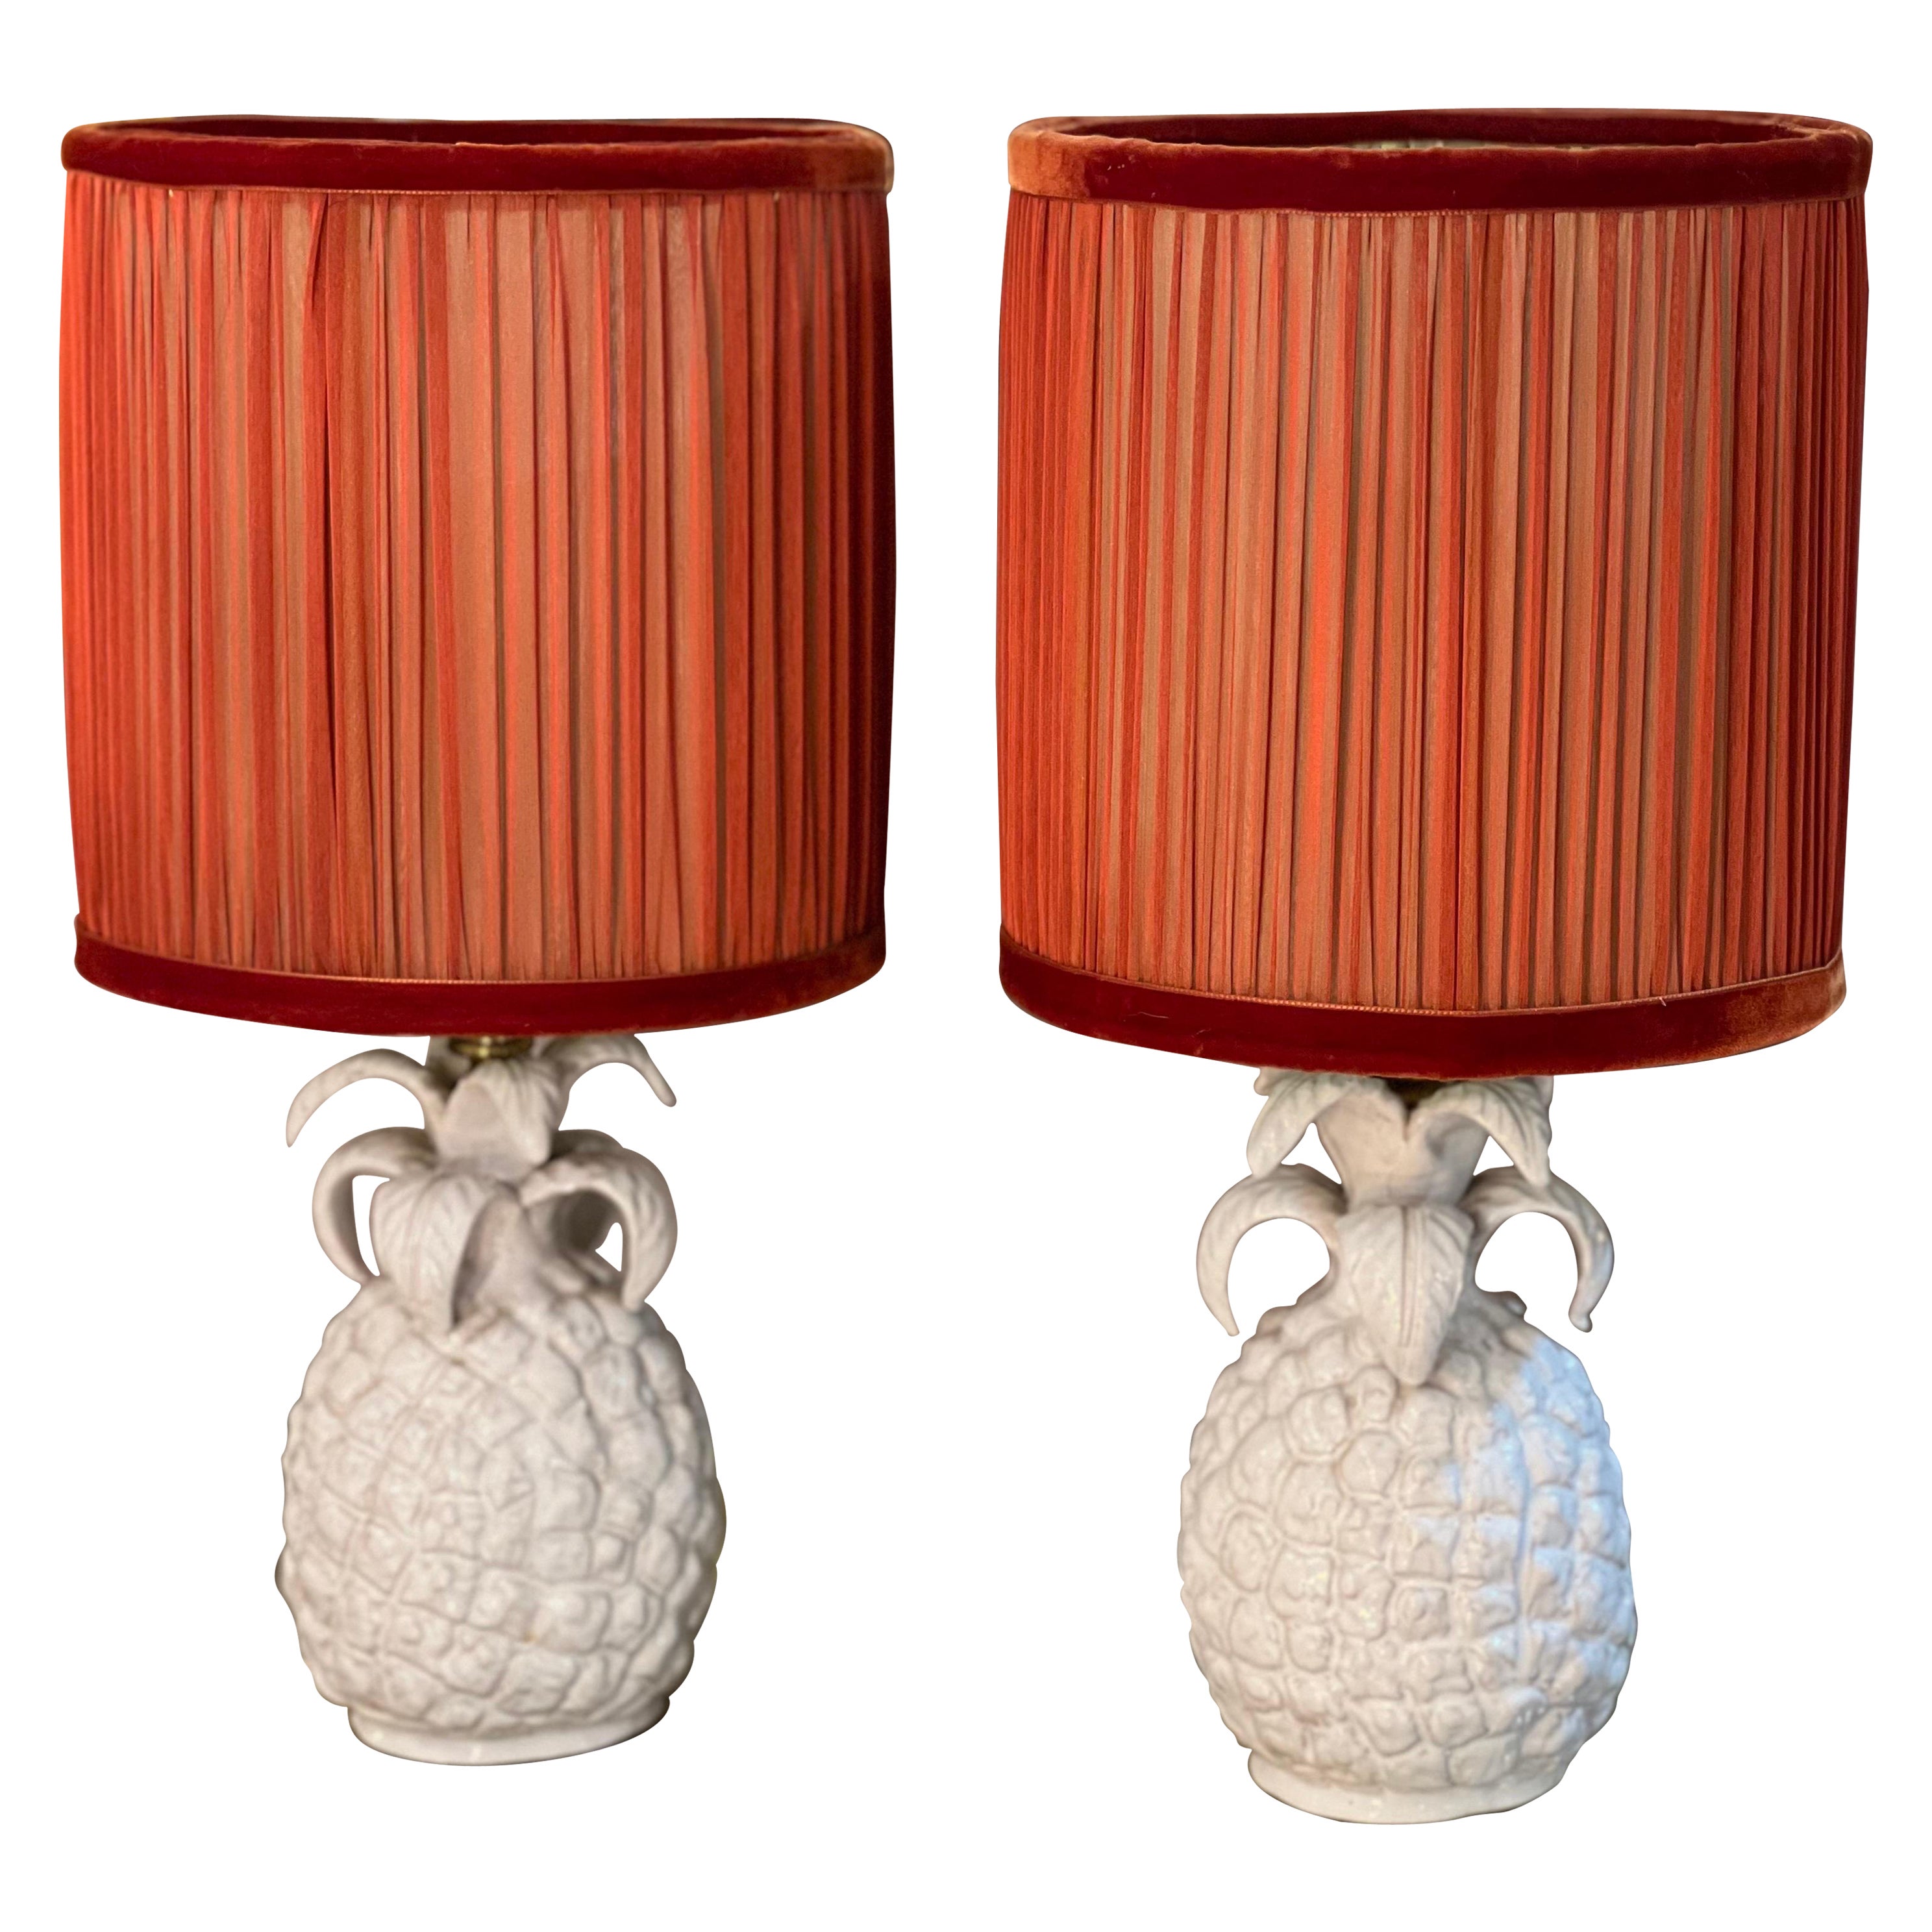 Pair of Ceramic Pineapple Shaped Lamps with our Handctafted Lampshades, 1950s